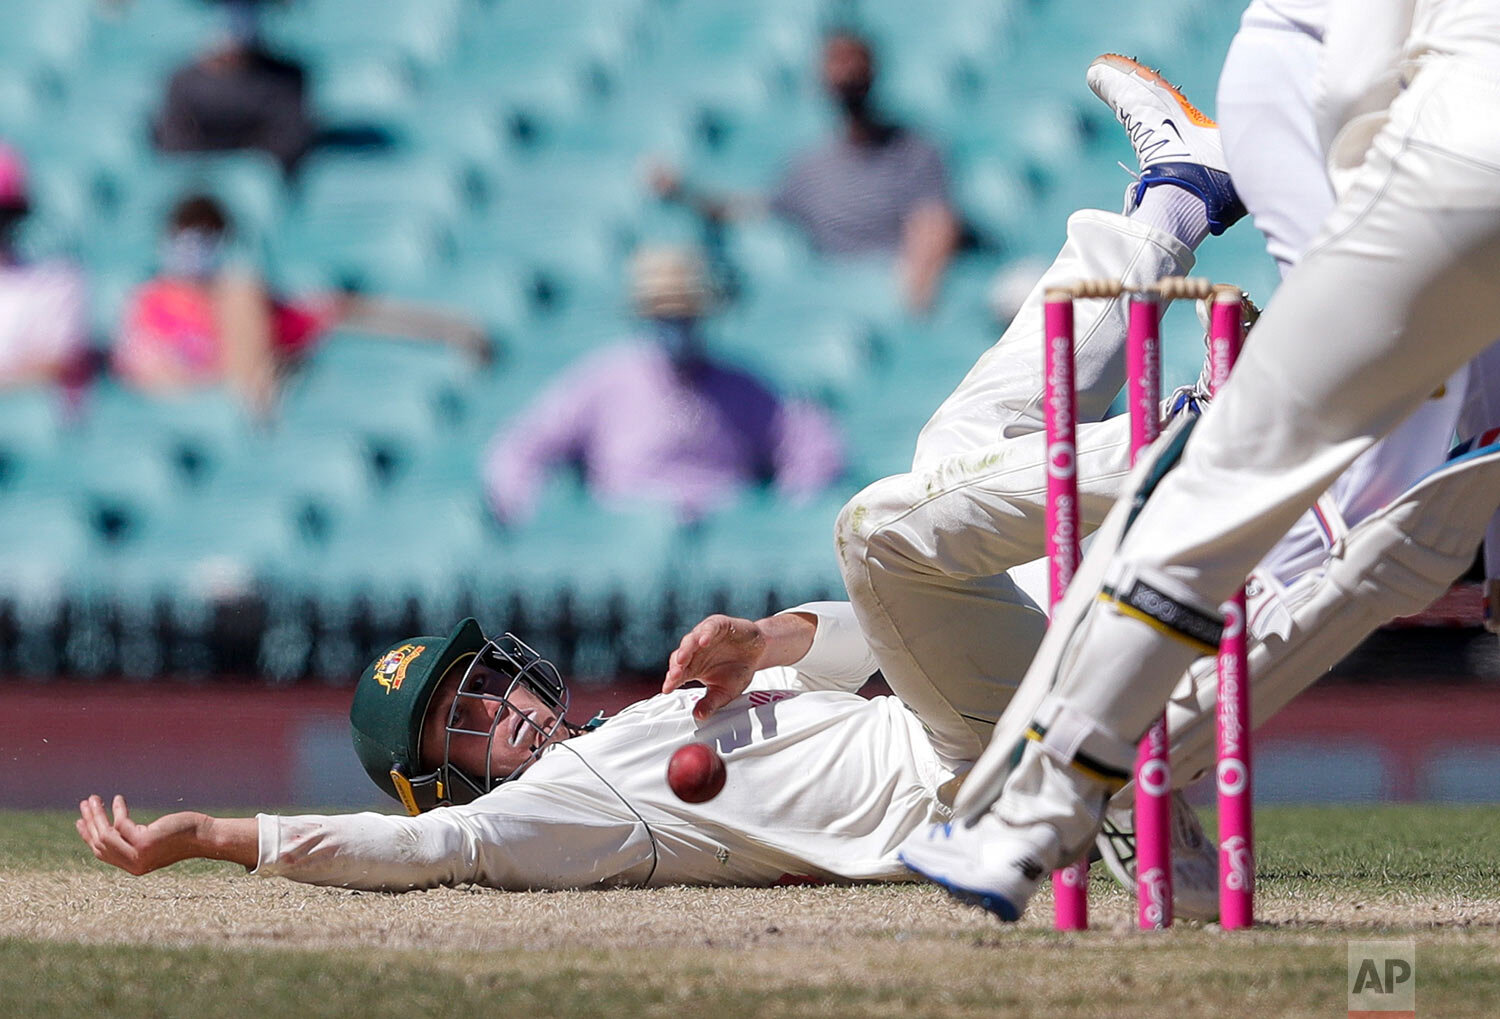  Australia's Marnus Labuschagne falls as he attempts to field the ball during play on the final day of the third cricket test between India and Australia at the Sydney Cricket Ground, Sydney, Australia, Monday, Jan. 11, 2021. (AP Photo/Rick Rycroft) 